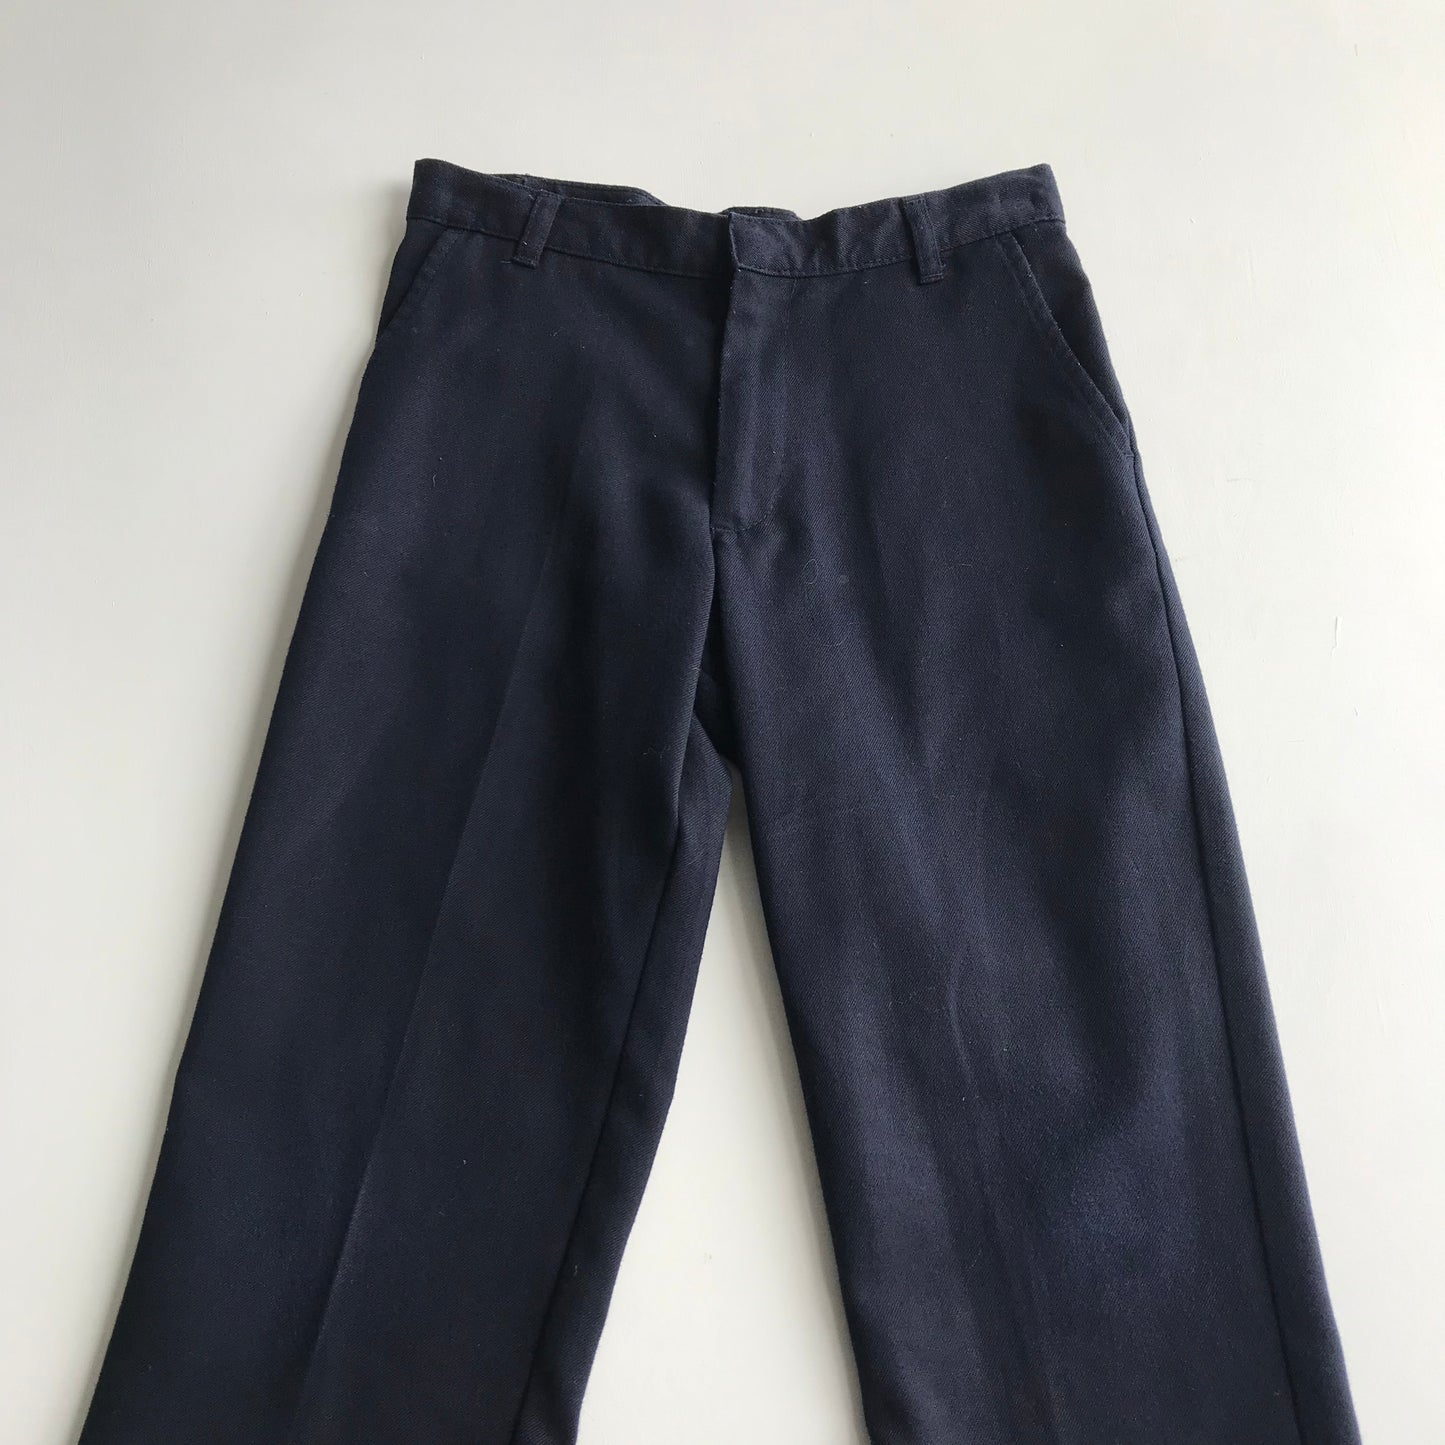 Navy Blue School Trousers with Adjustable Waist